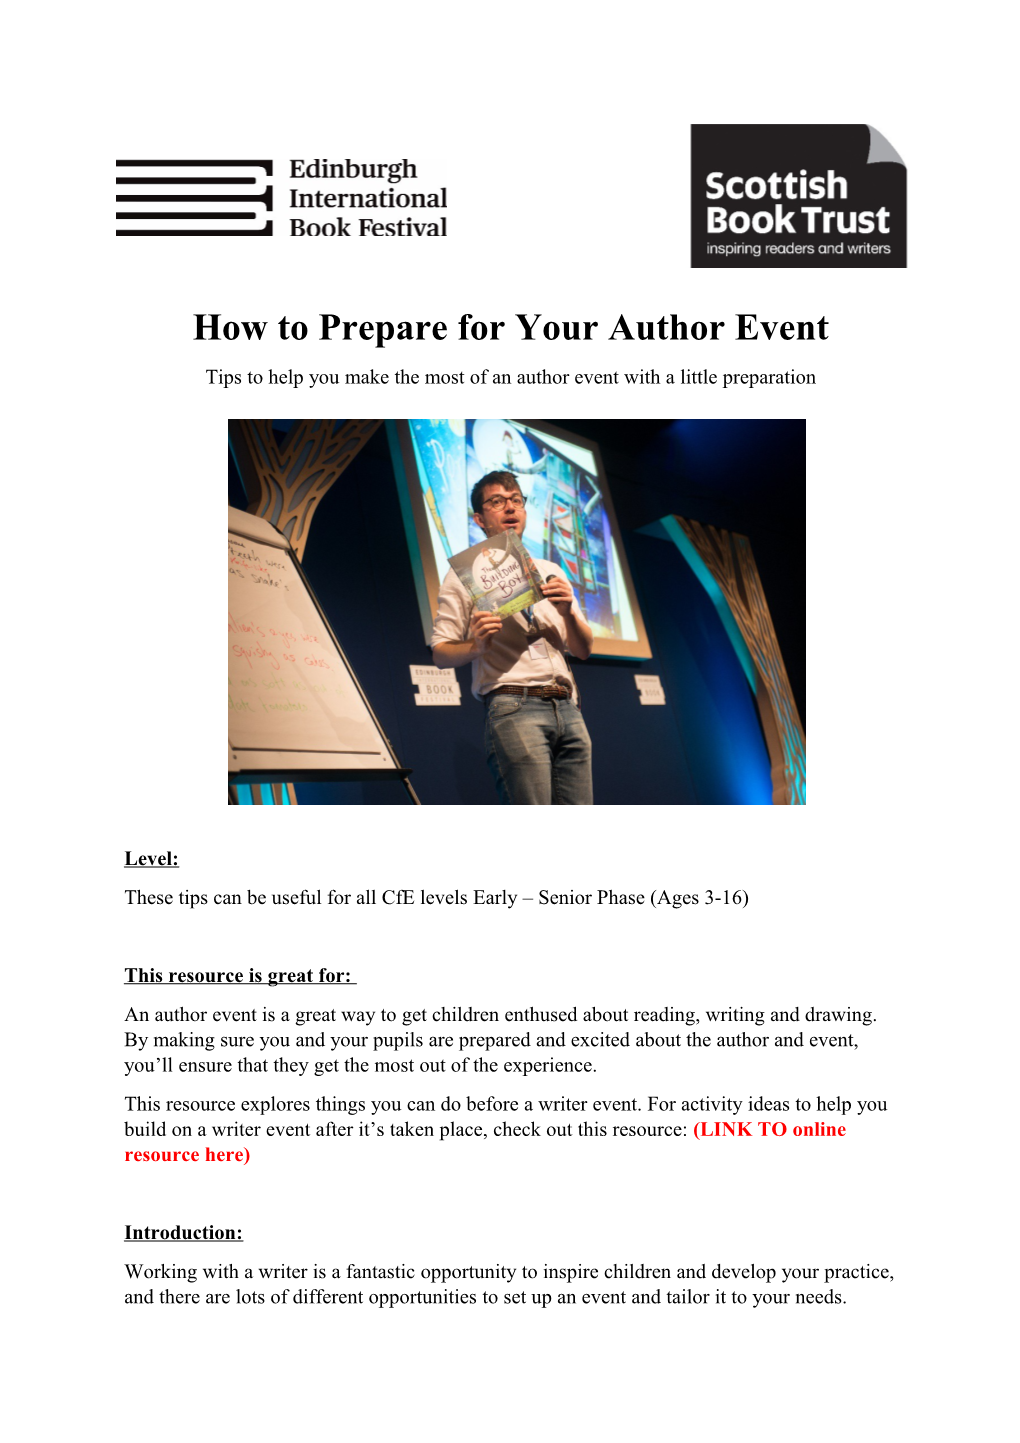 How to Prepare for Your Author Event